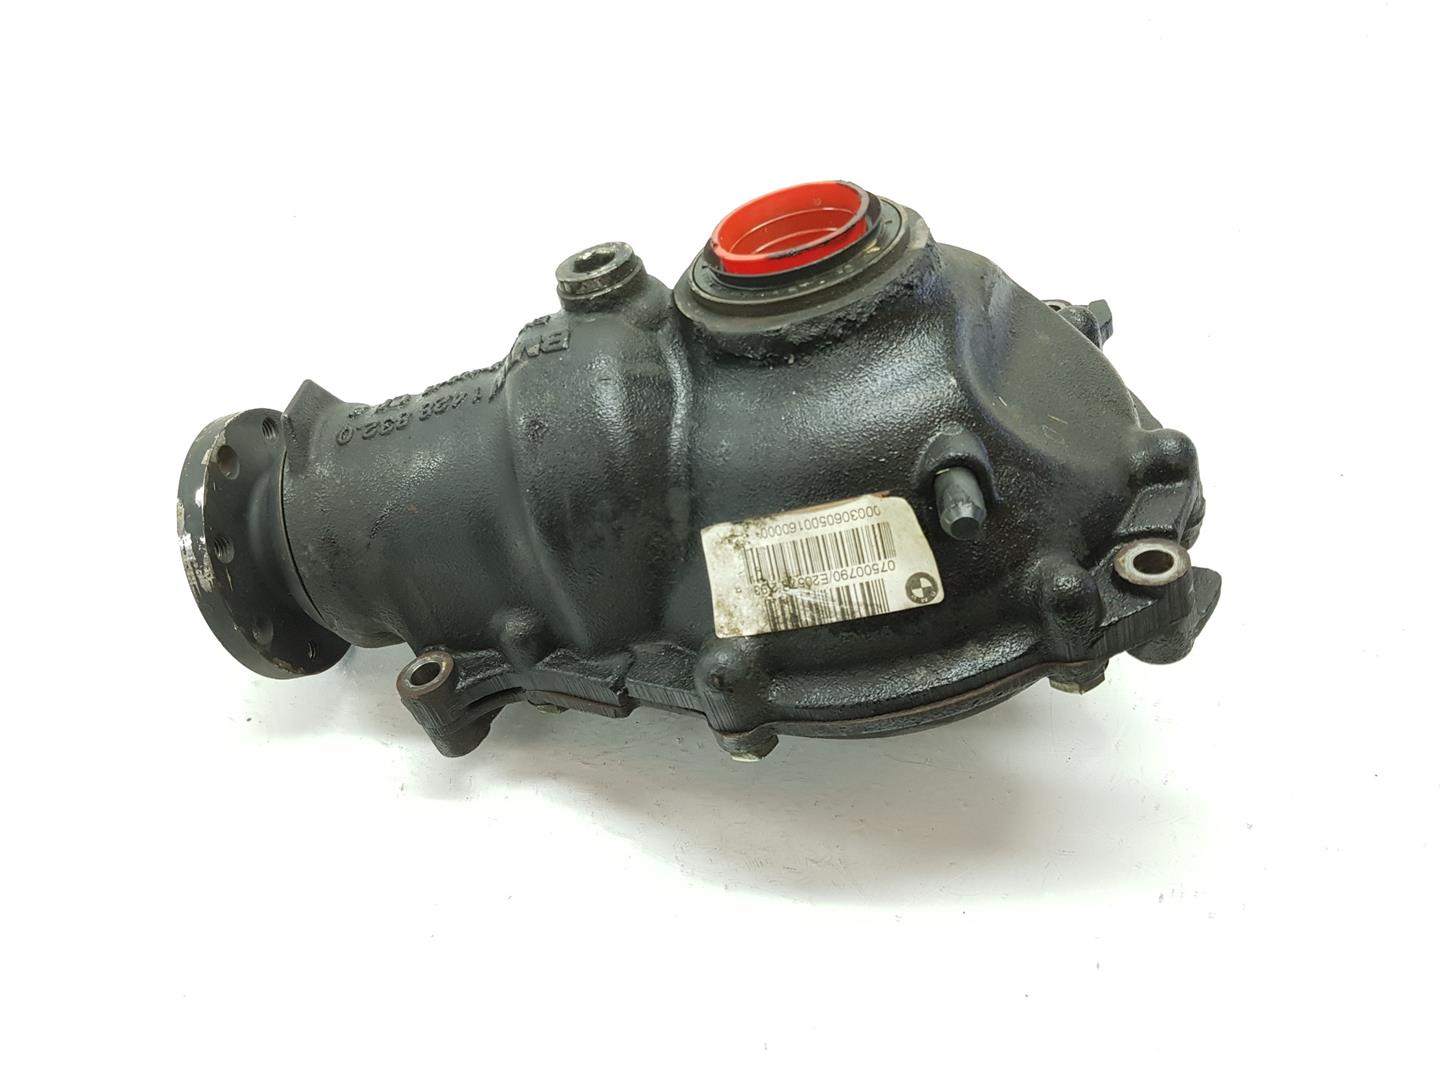 BMW 3 Series E46 (1997-2006) Rear Differential 7500790, 33107500789 24551483